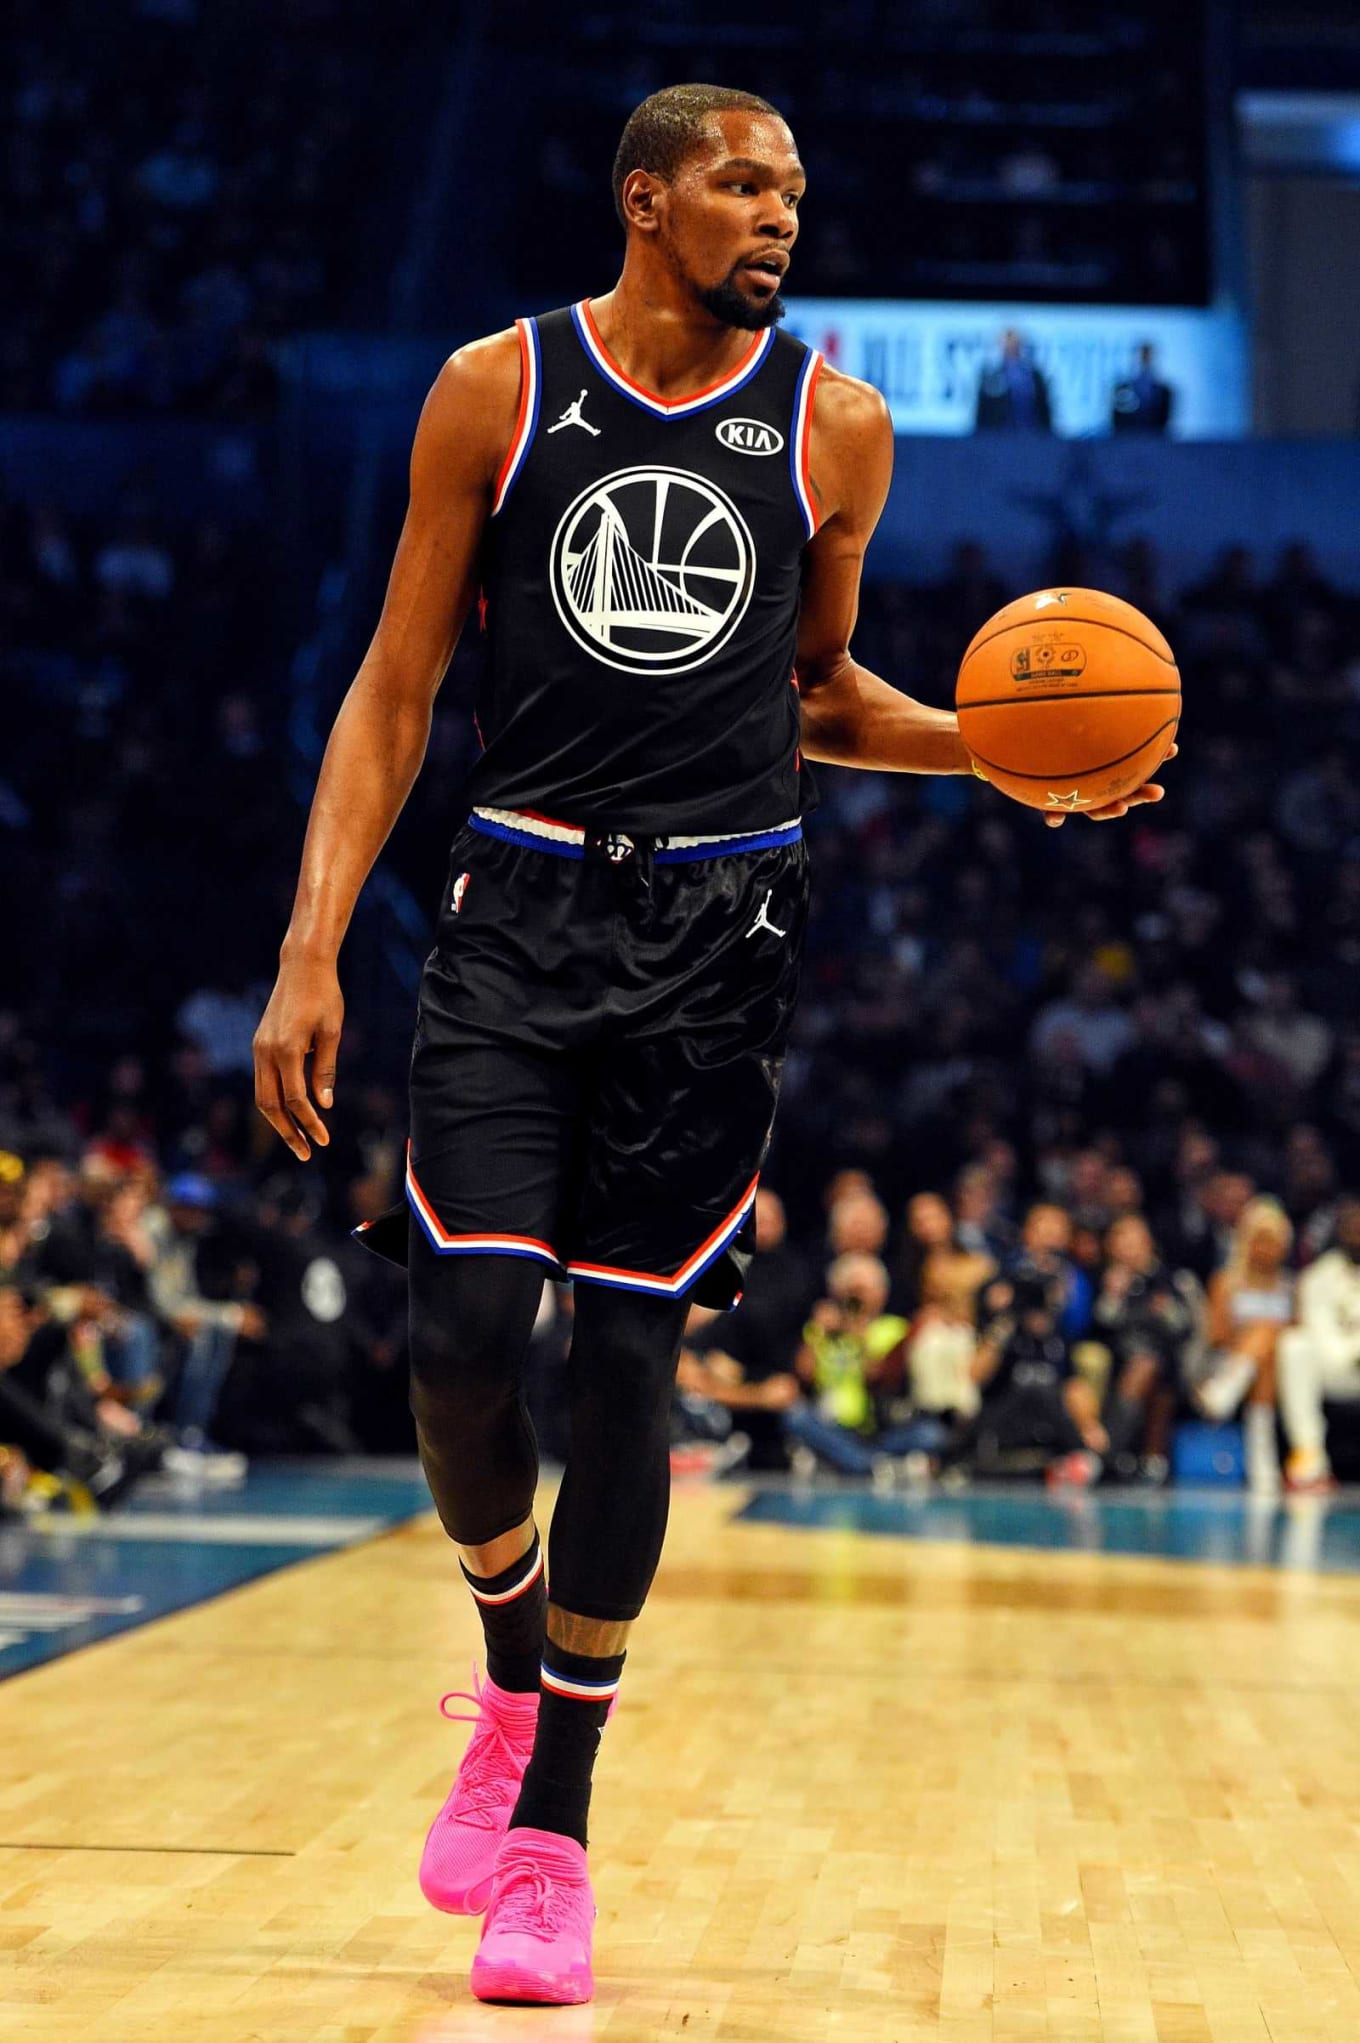 kd all star game